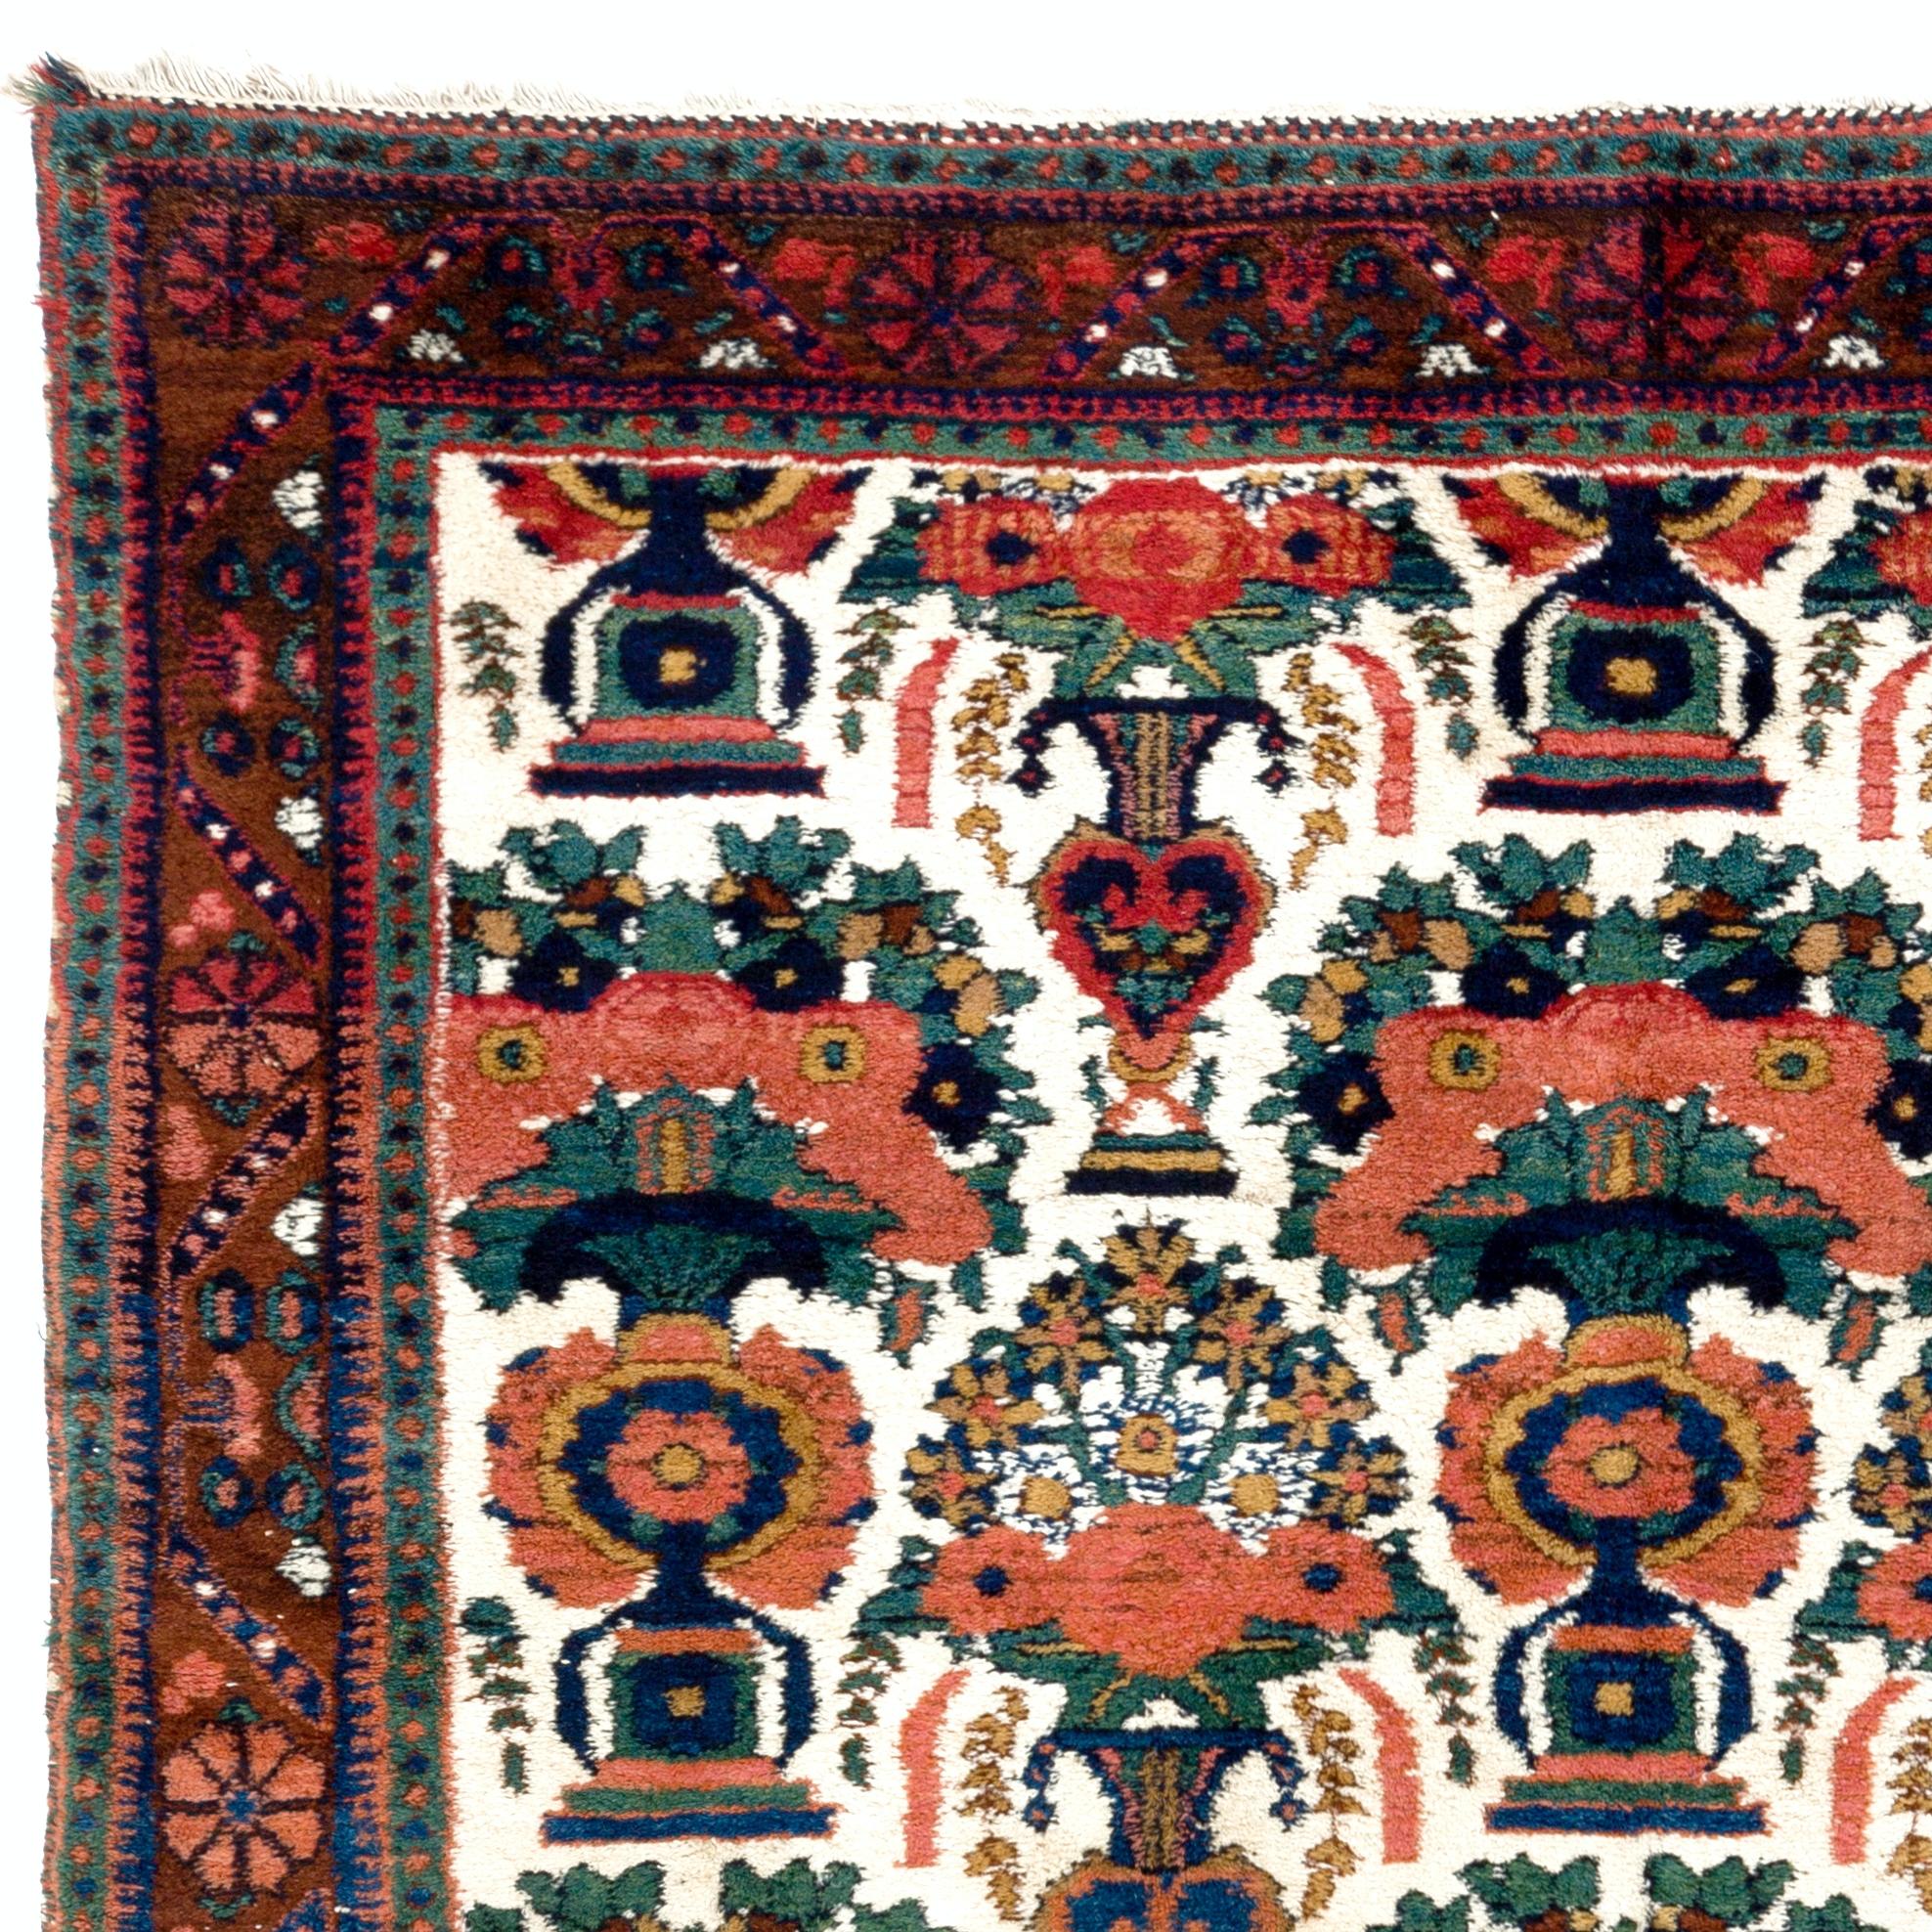 Hand-Knotted 4.8x6.3 ft Antique Persian Tribal Afshar Rug, Excellent Original Condition For Sale